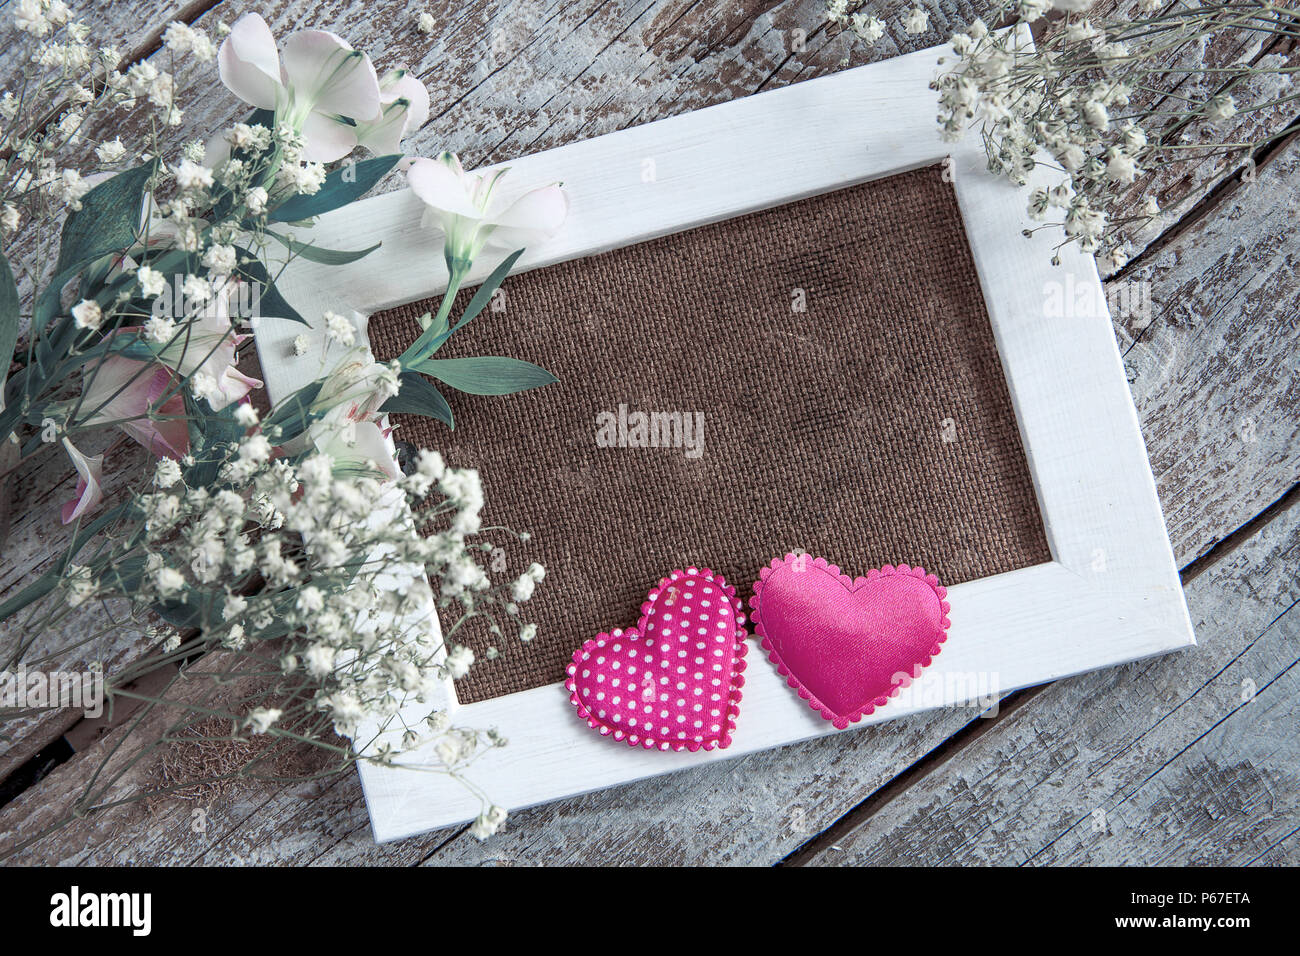 Blank photo frame and white flowers over wooden table background Stock Photo